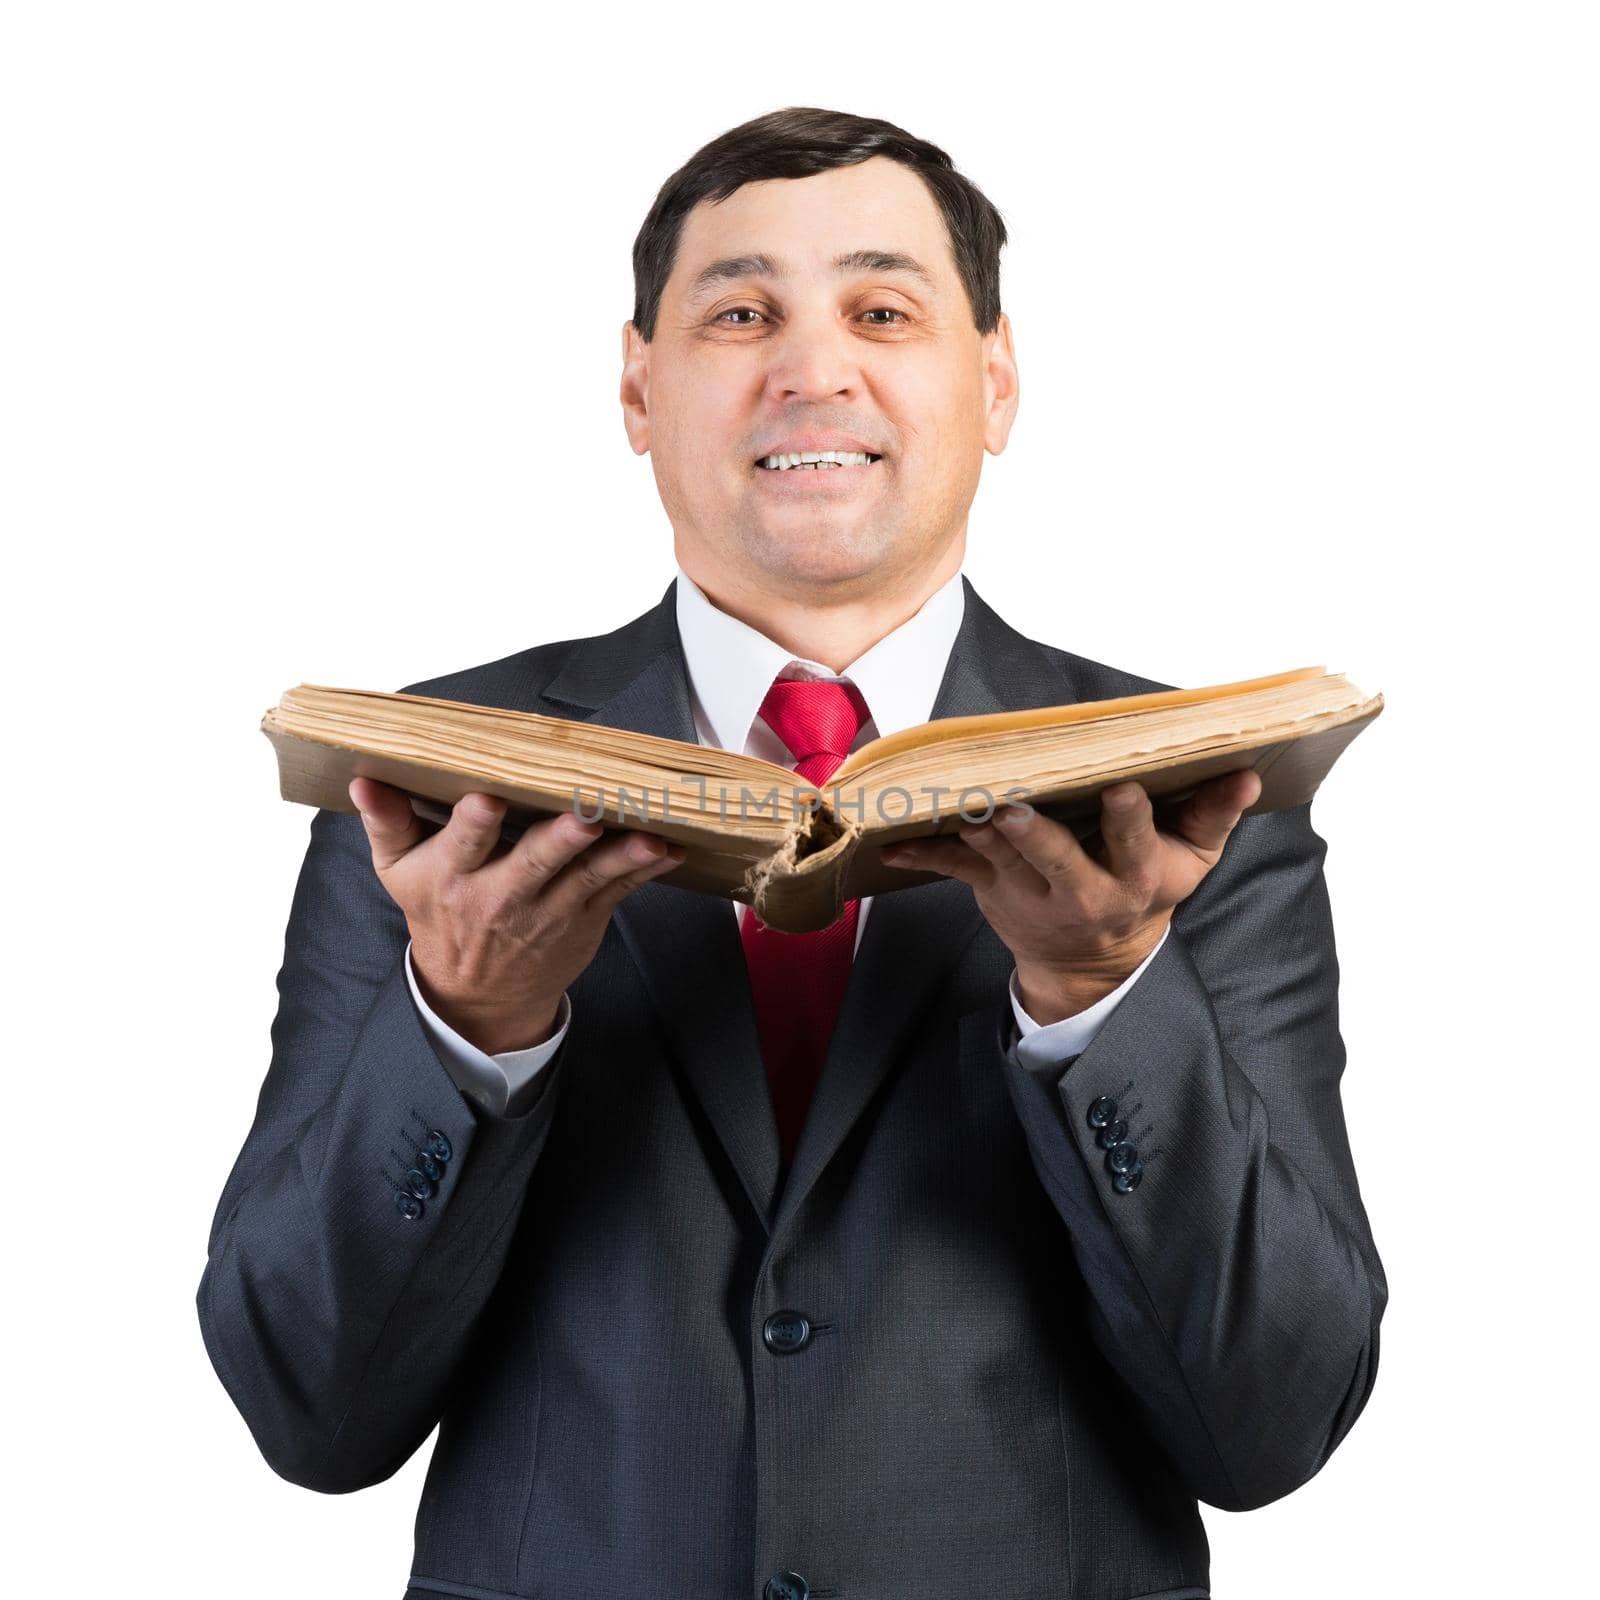 Senior businessman holding book and looking at camera. Portrait of smiling adult man in business suit and tie standing on white background. Education and knowledges. Professional business accounting.